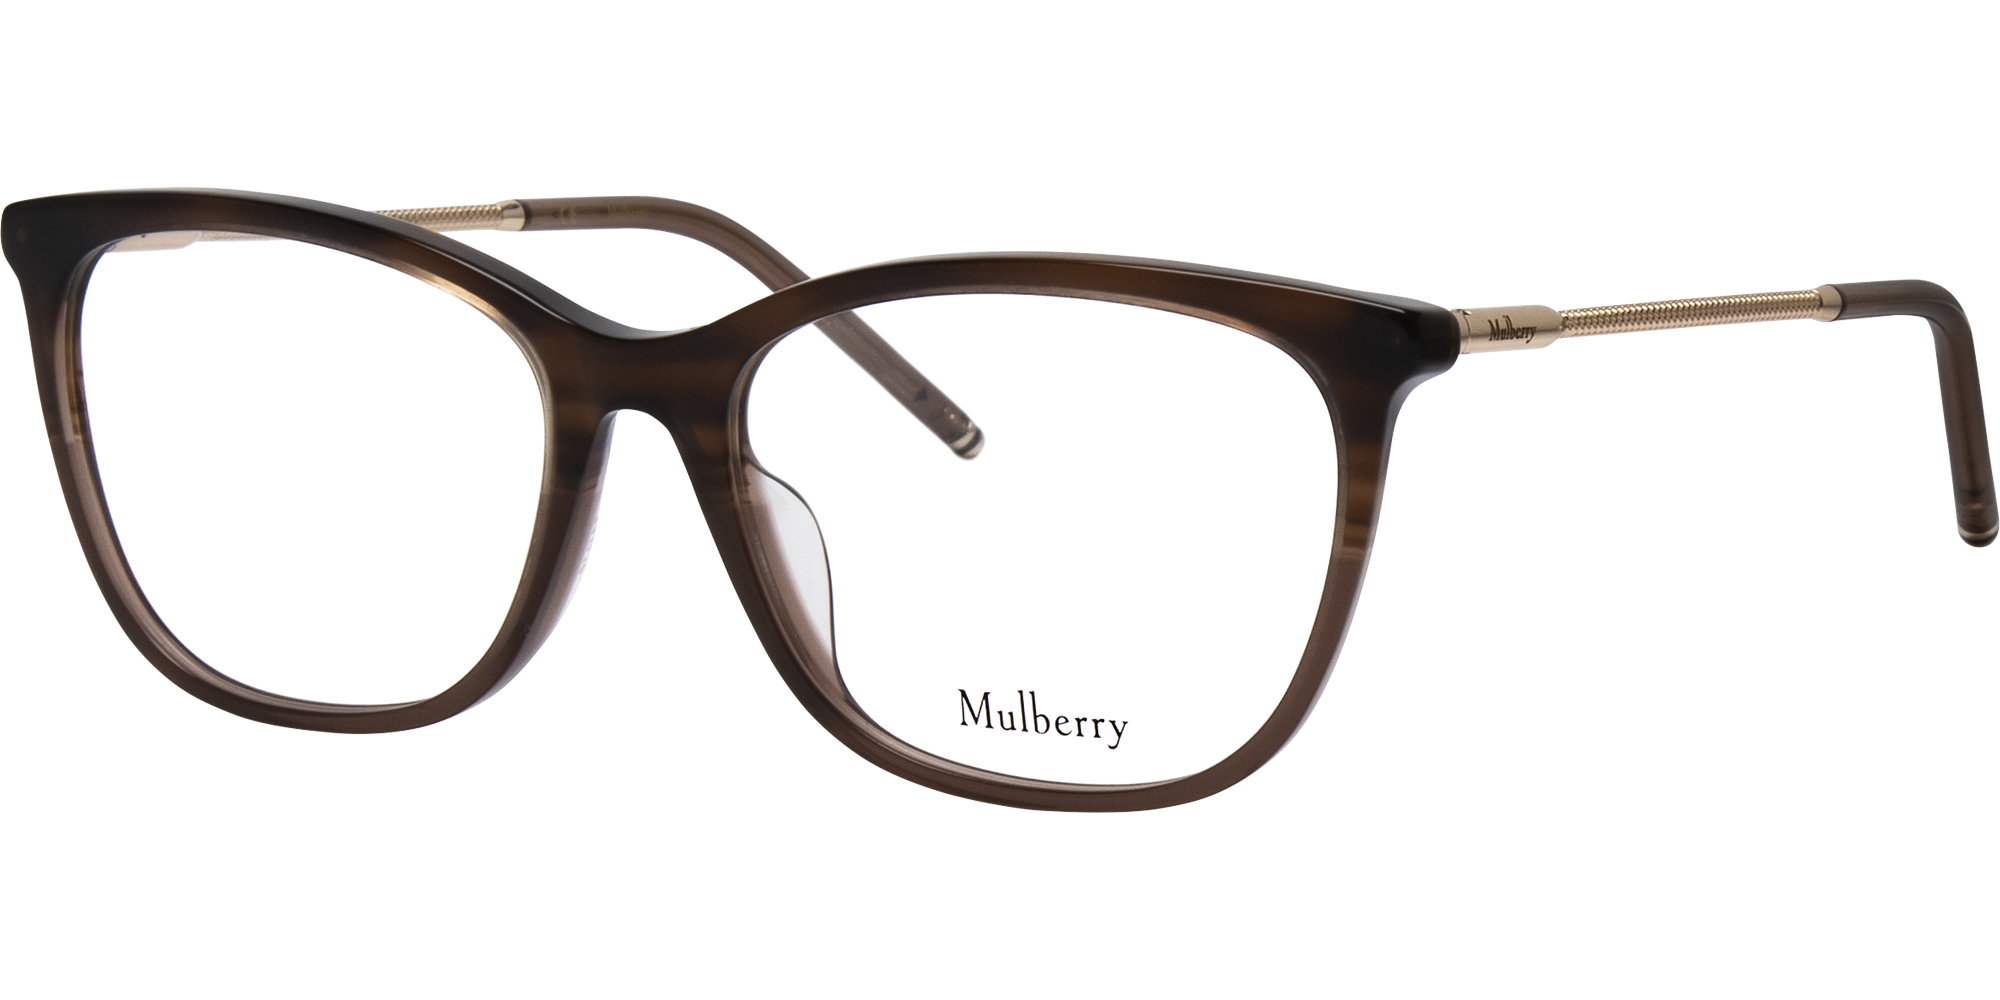 Mulberry VML144 image number null